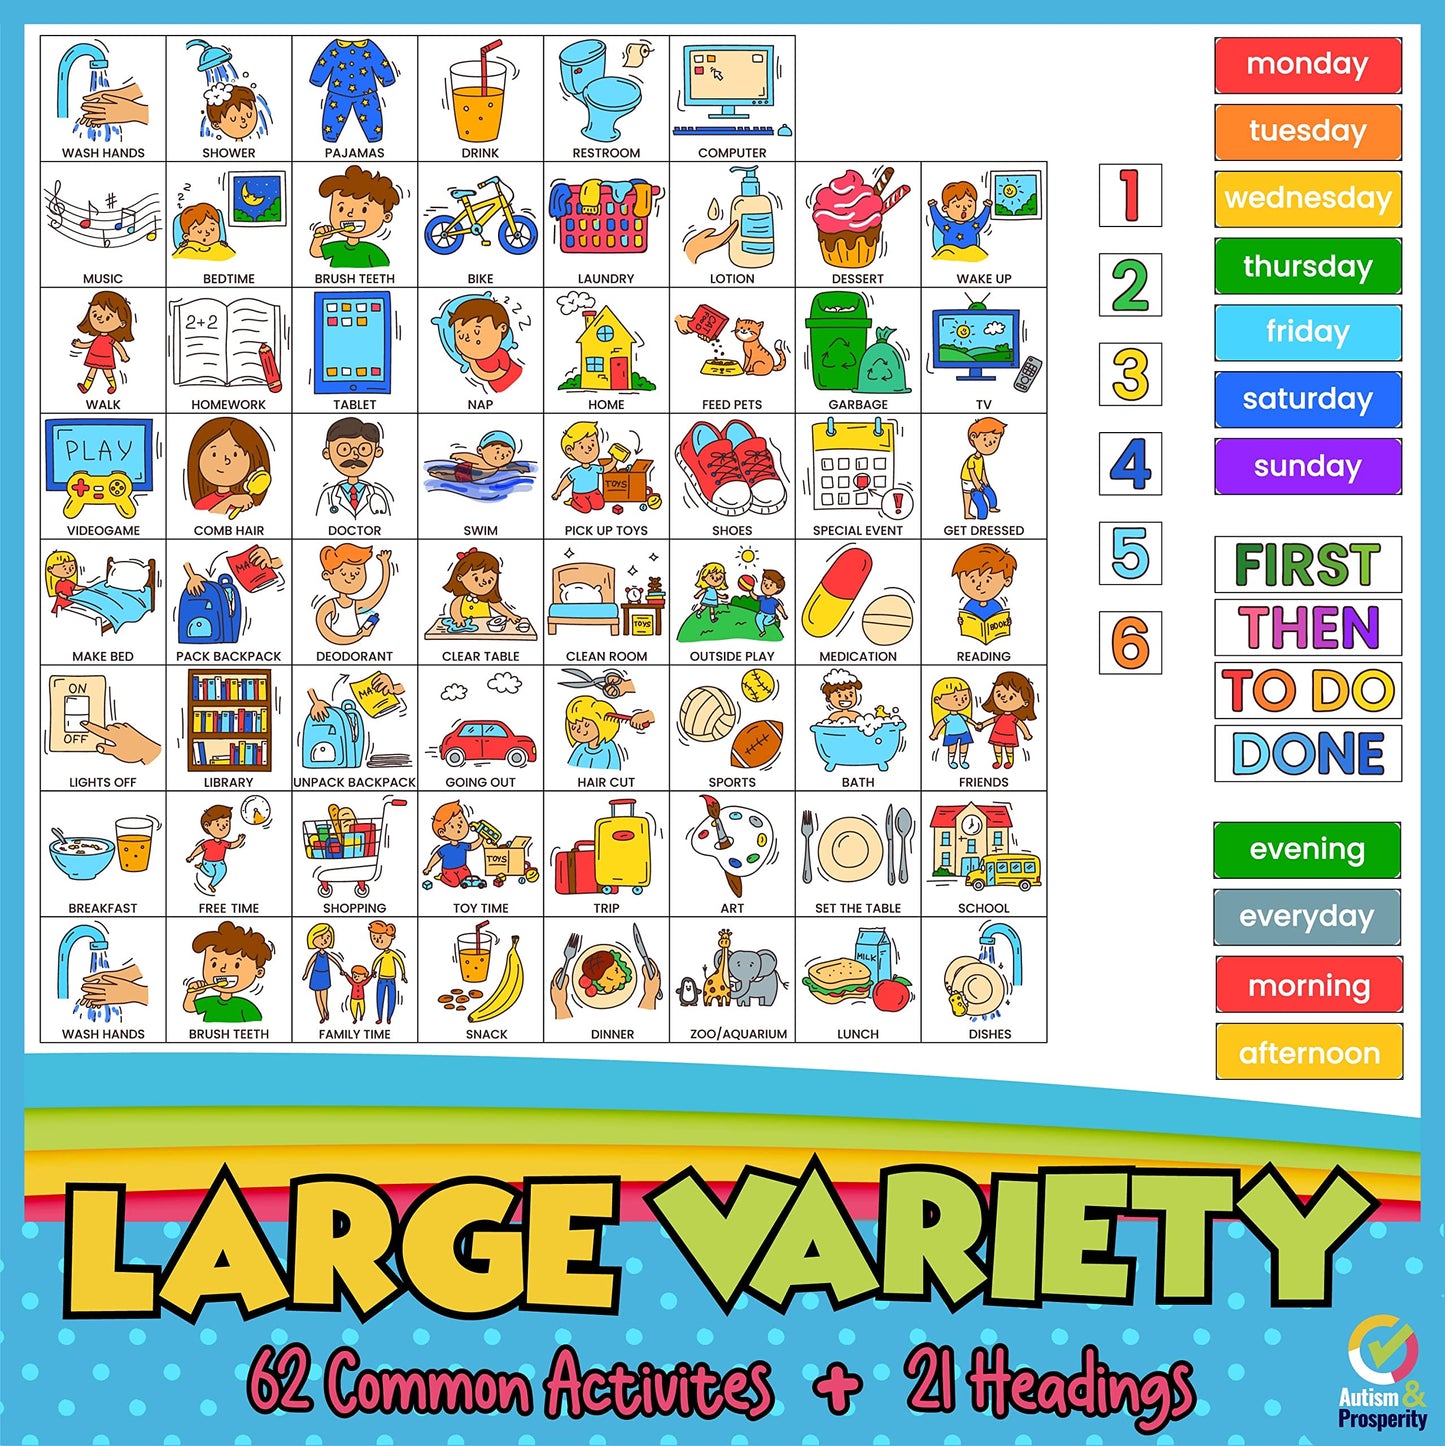 Autism & Prosperity Kids Time Schedule Tasks Autistic Children Learning Materials ASD Boys Girl Teen Visual Timer Magnet Pec Card Special Needs No 1-3 Toddlers Age 3 4 5-7 8-12 Sensory Toys Chart Gift